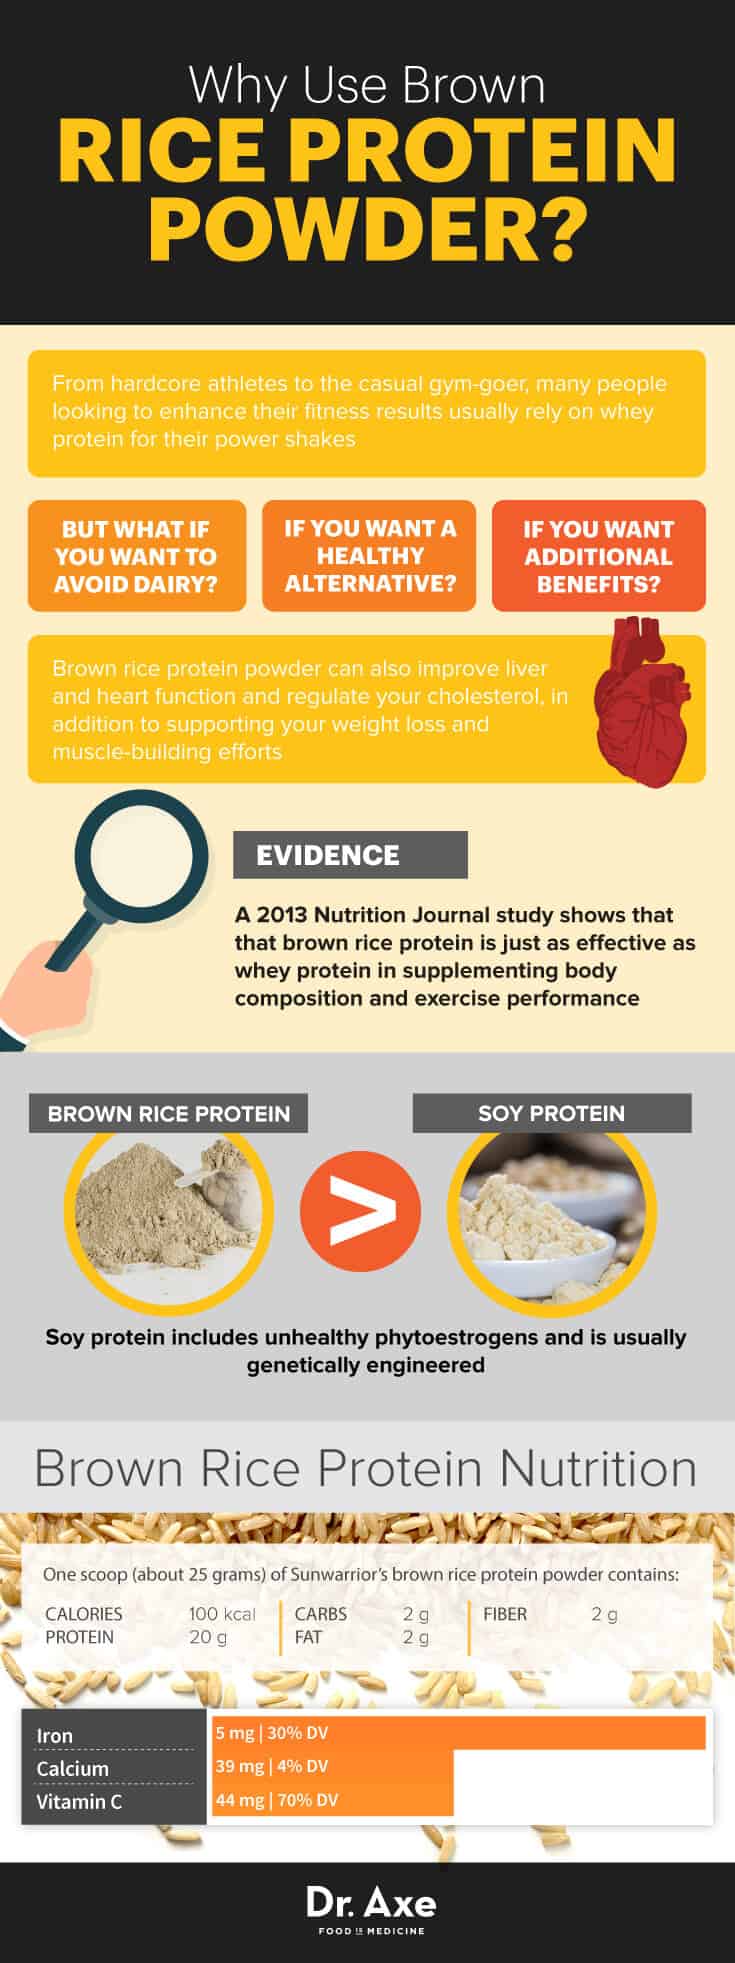 Brown Rice Protein - Dr. Axe